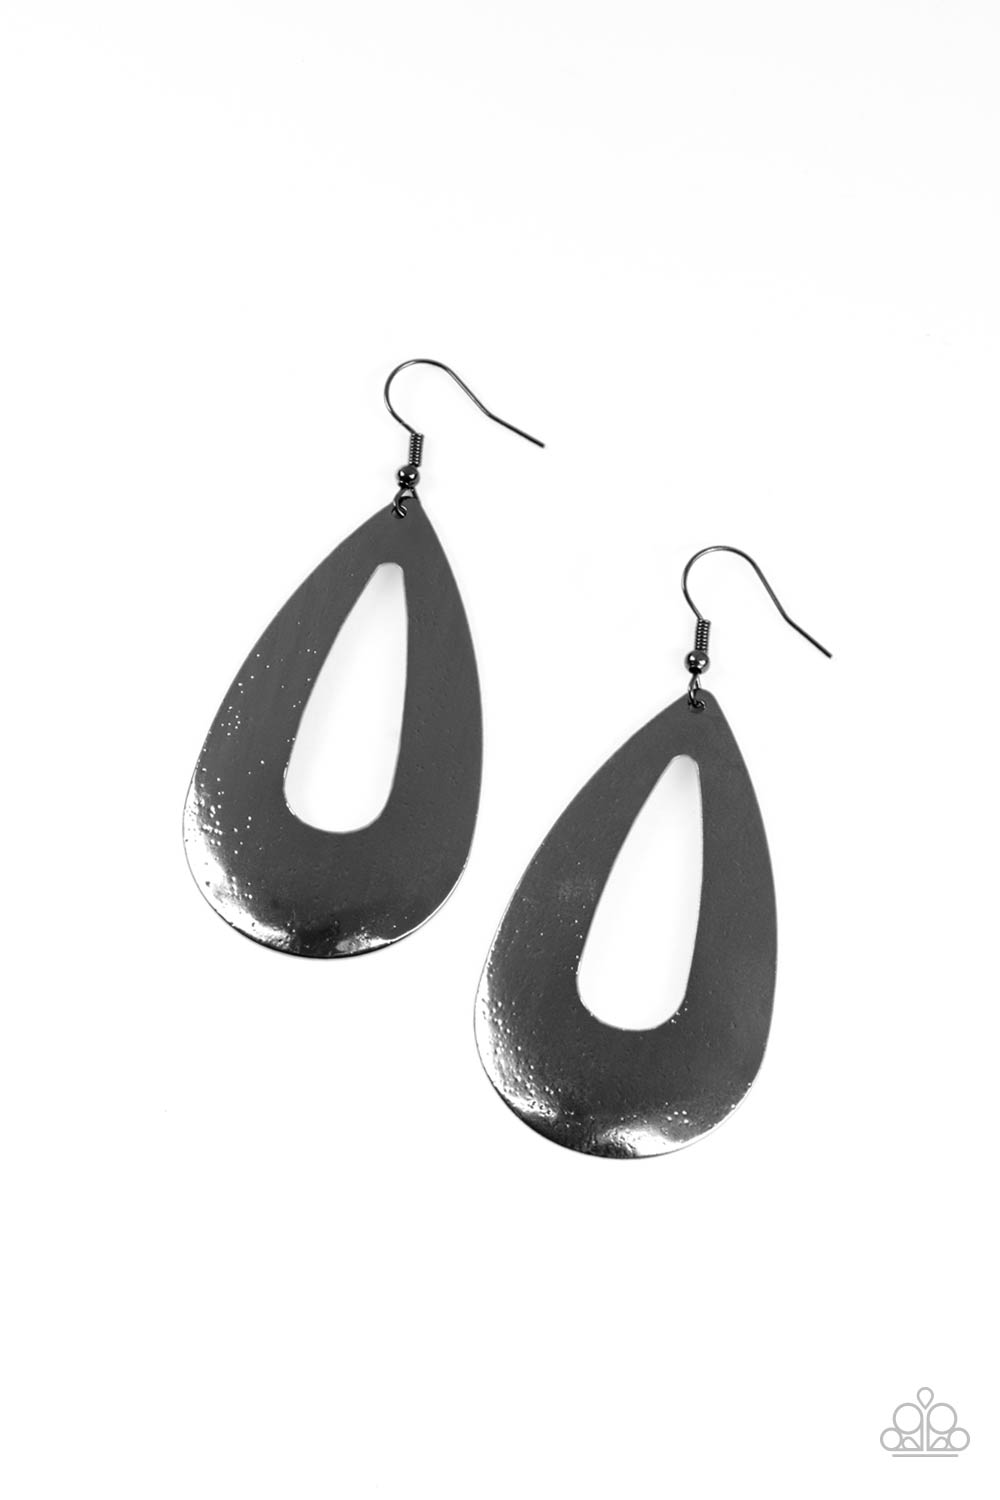 Paparazzi Accessories Hand it OVAL! - Black Earrings - Lady T Accessories